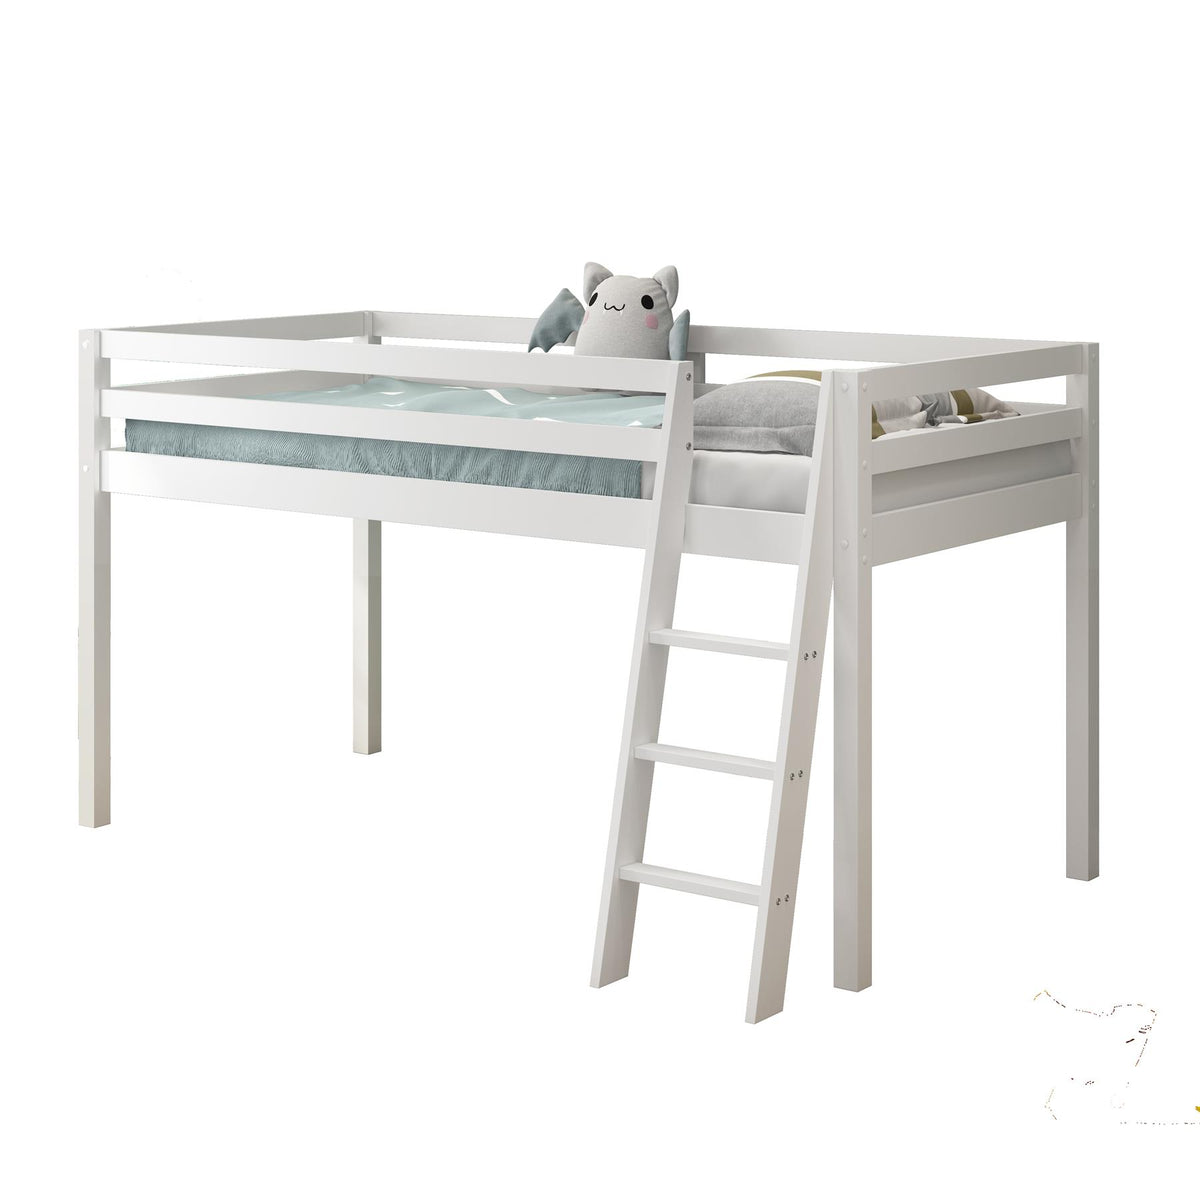 Mid sleeper Bed kids white 3ft single and 1 mattress wooden childrens bedroom furniture